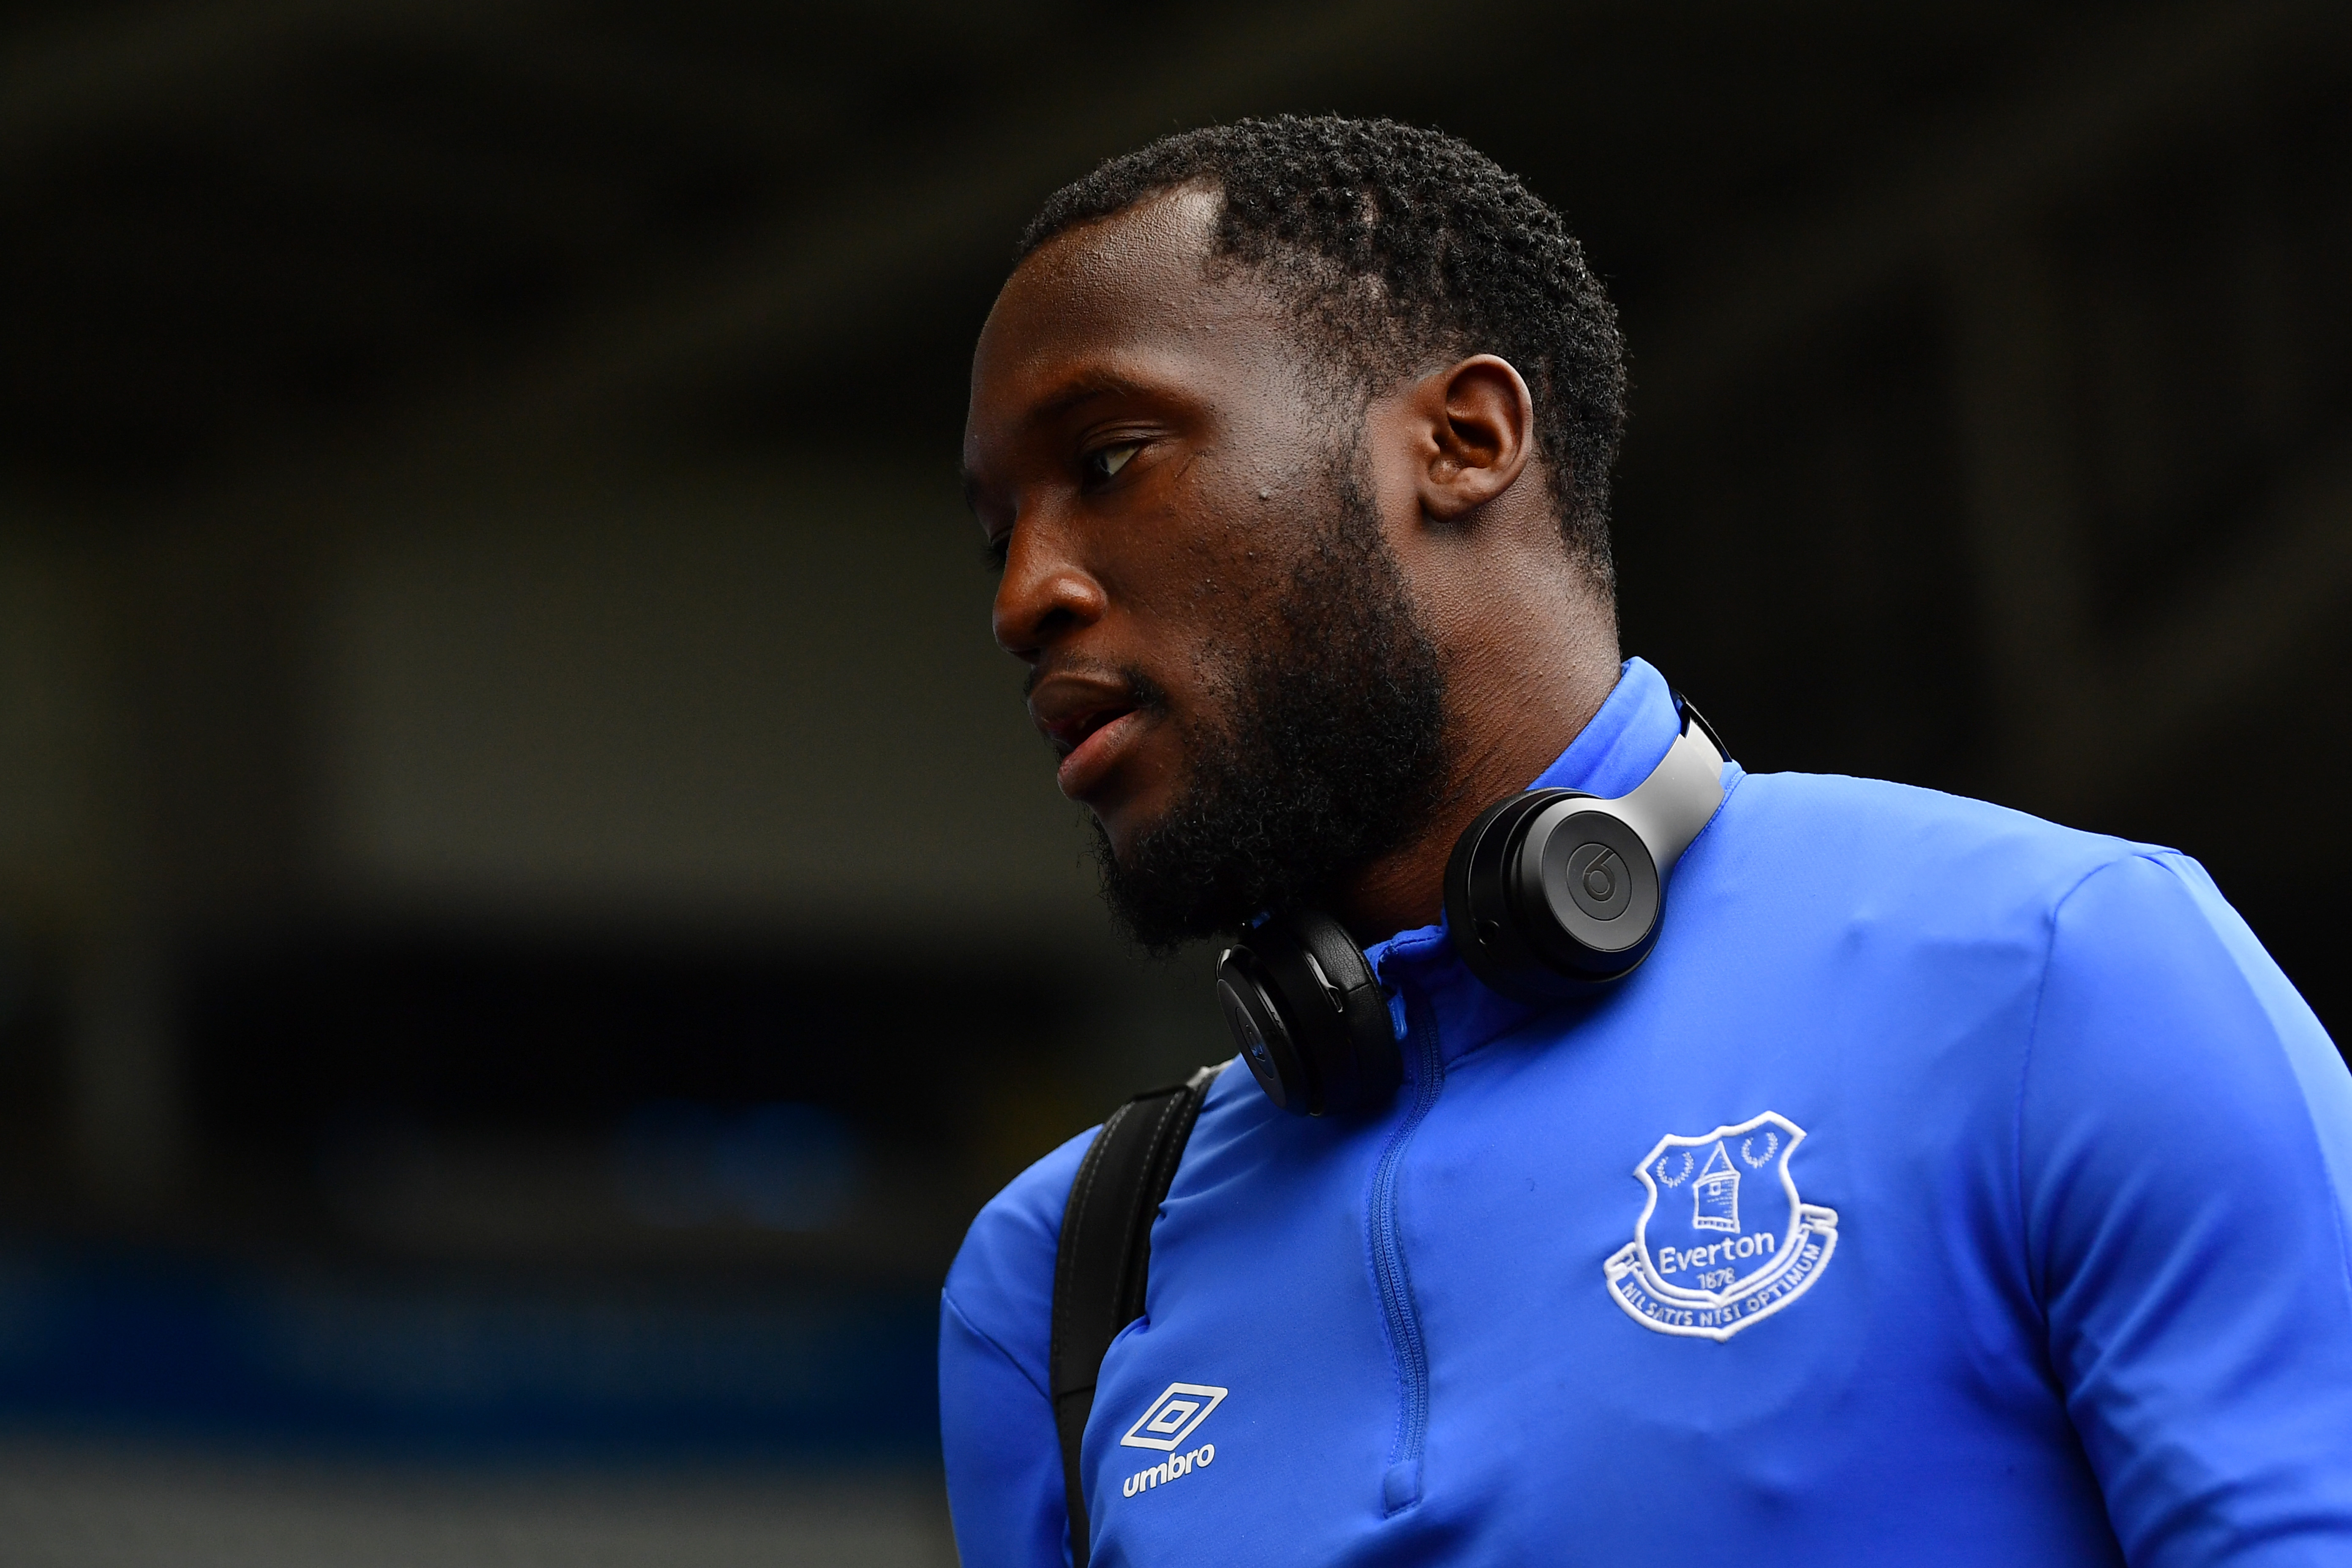 SWANSEA, WALES - MAY 06: Romelu Lukaku of Everton arrives at the stadium prior to the Premier League match between Swansea City and Everton at the Liberty Stadium on May 6, 2017 in Swansea, Wales.  (Photo by Dan Mullan/Getty Images)